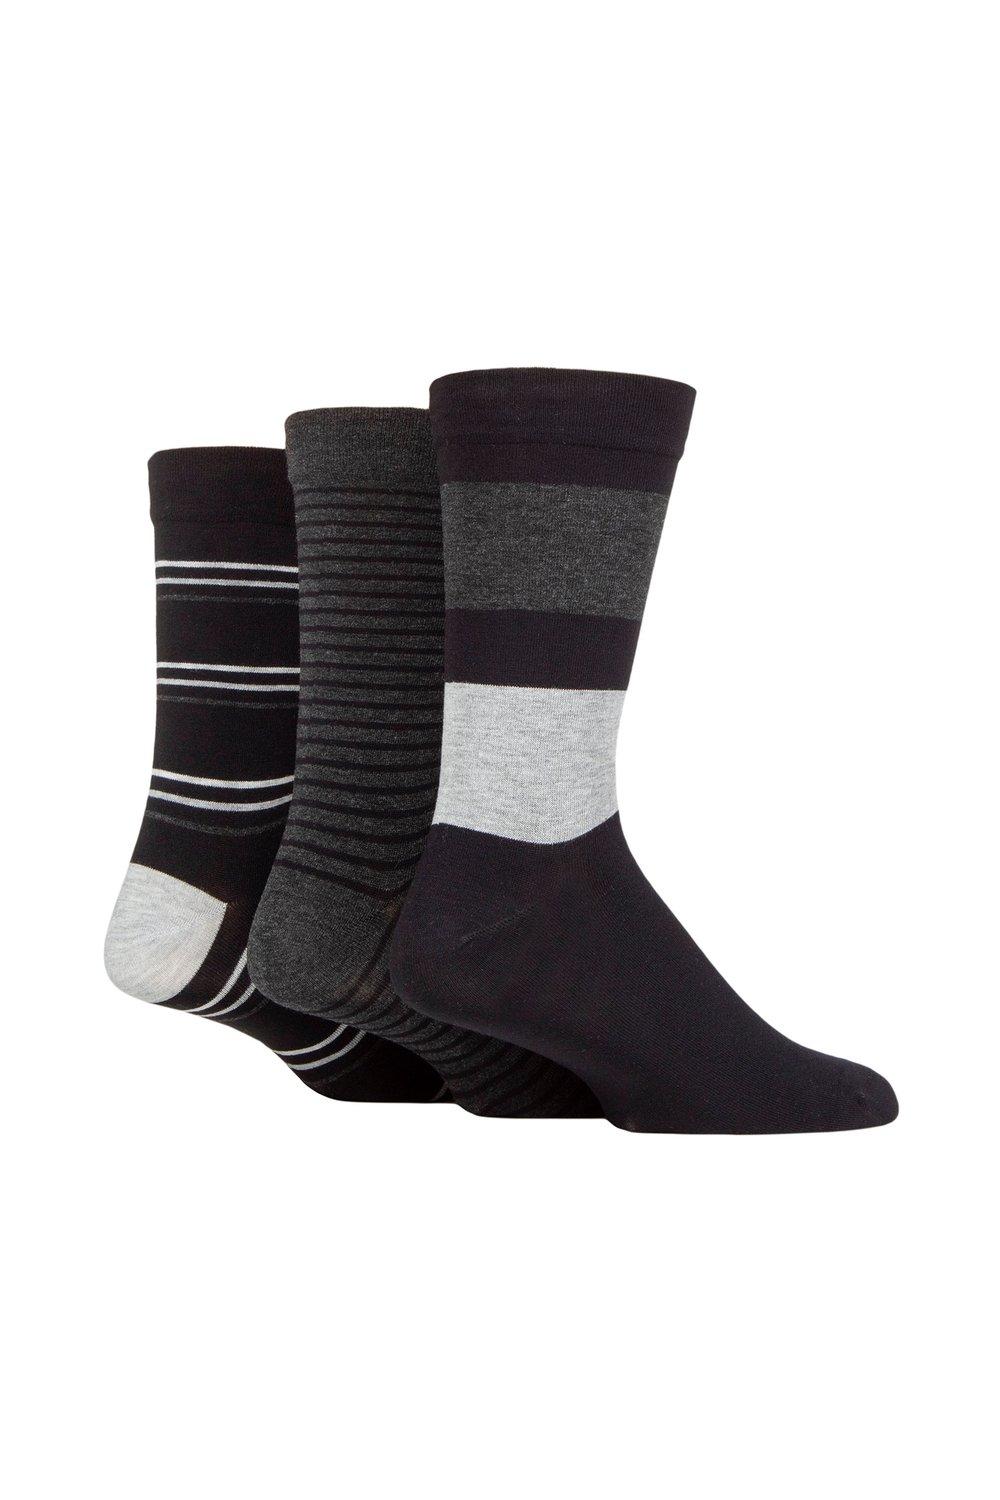 3 Pair Comfort Cuff Gentle Bamboo Striped Socks with Smooth Toe Seams